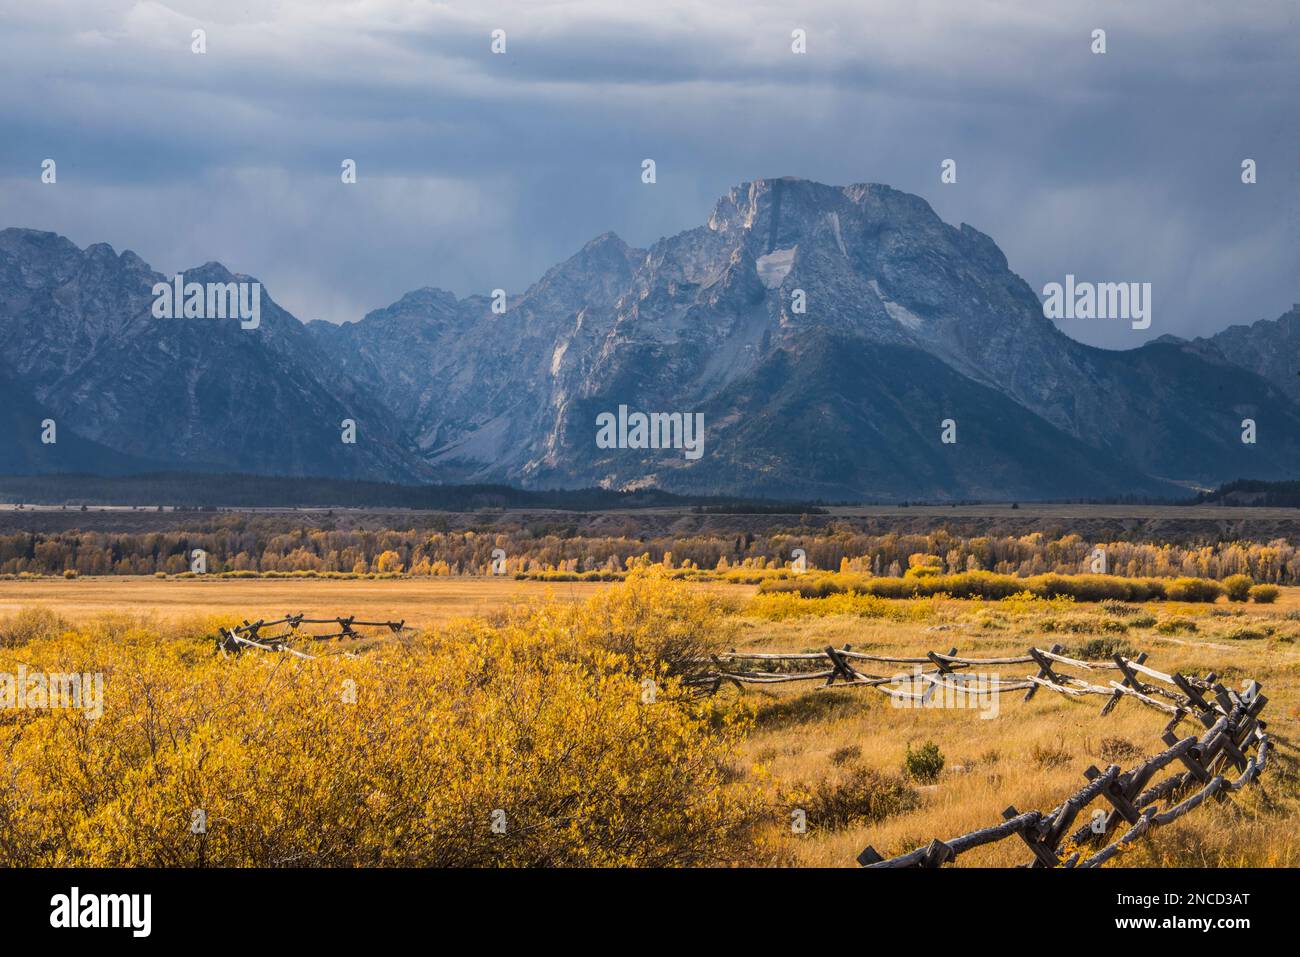 A storm clears over the Teton Range and Mt Moran as seen from historical Cunningham Cabin, Grand Teton National Park, Wyoming, USA Stock Photo